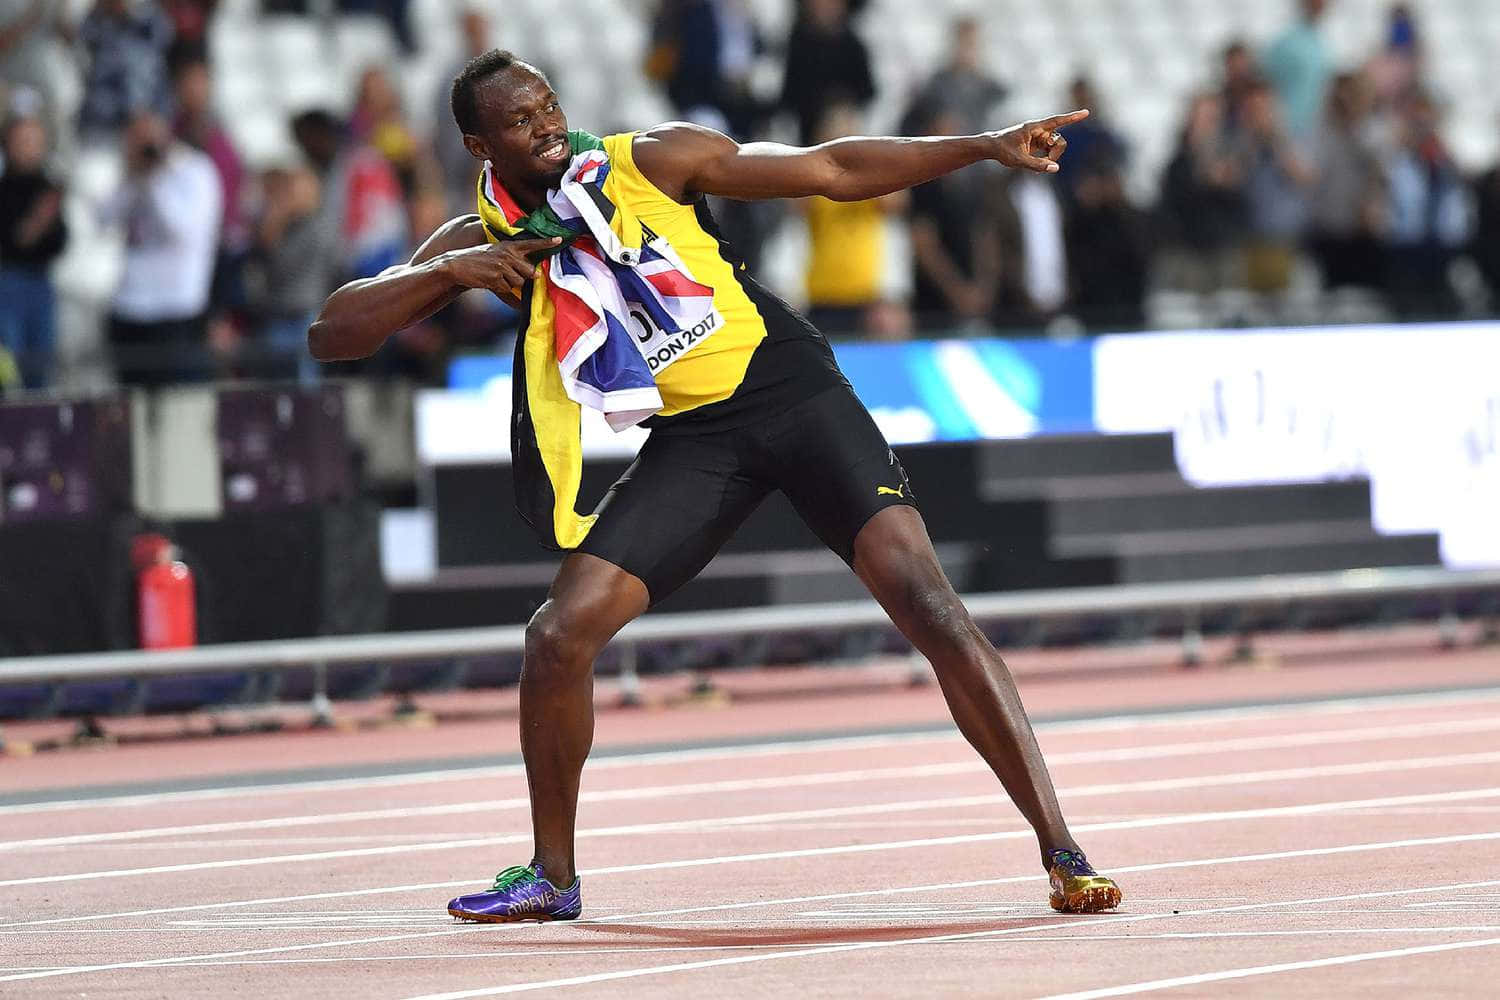 How Has Usain Bolt Inspired The Olympic Games?